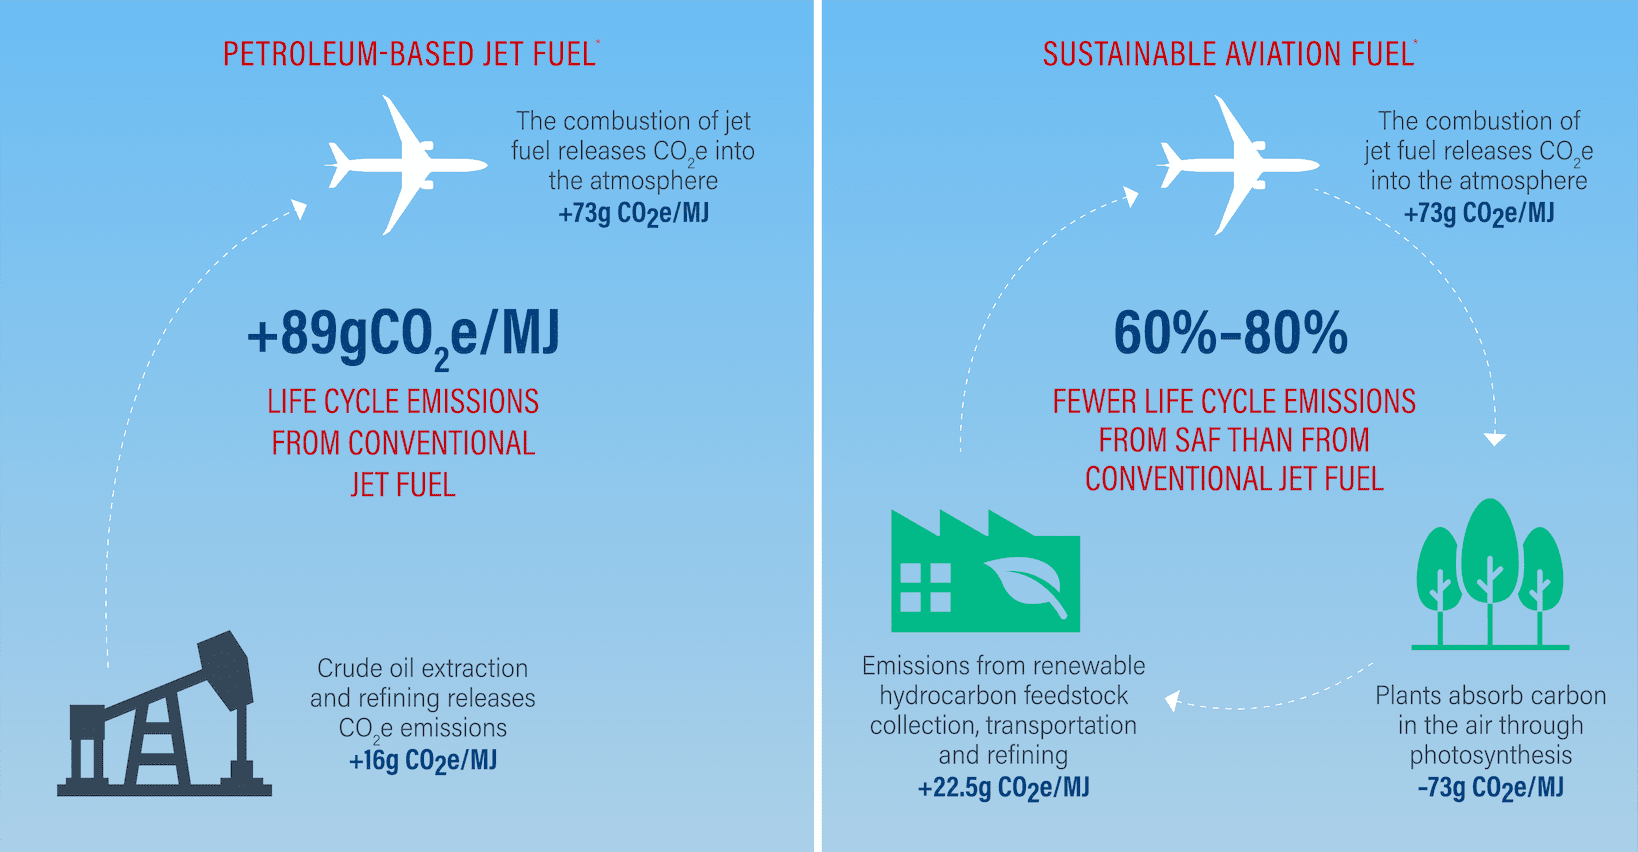 American Airlines ESG climatechange sustainableaviationfuel